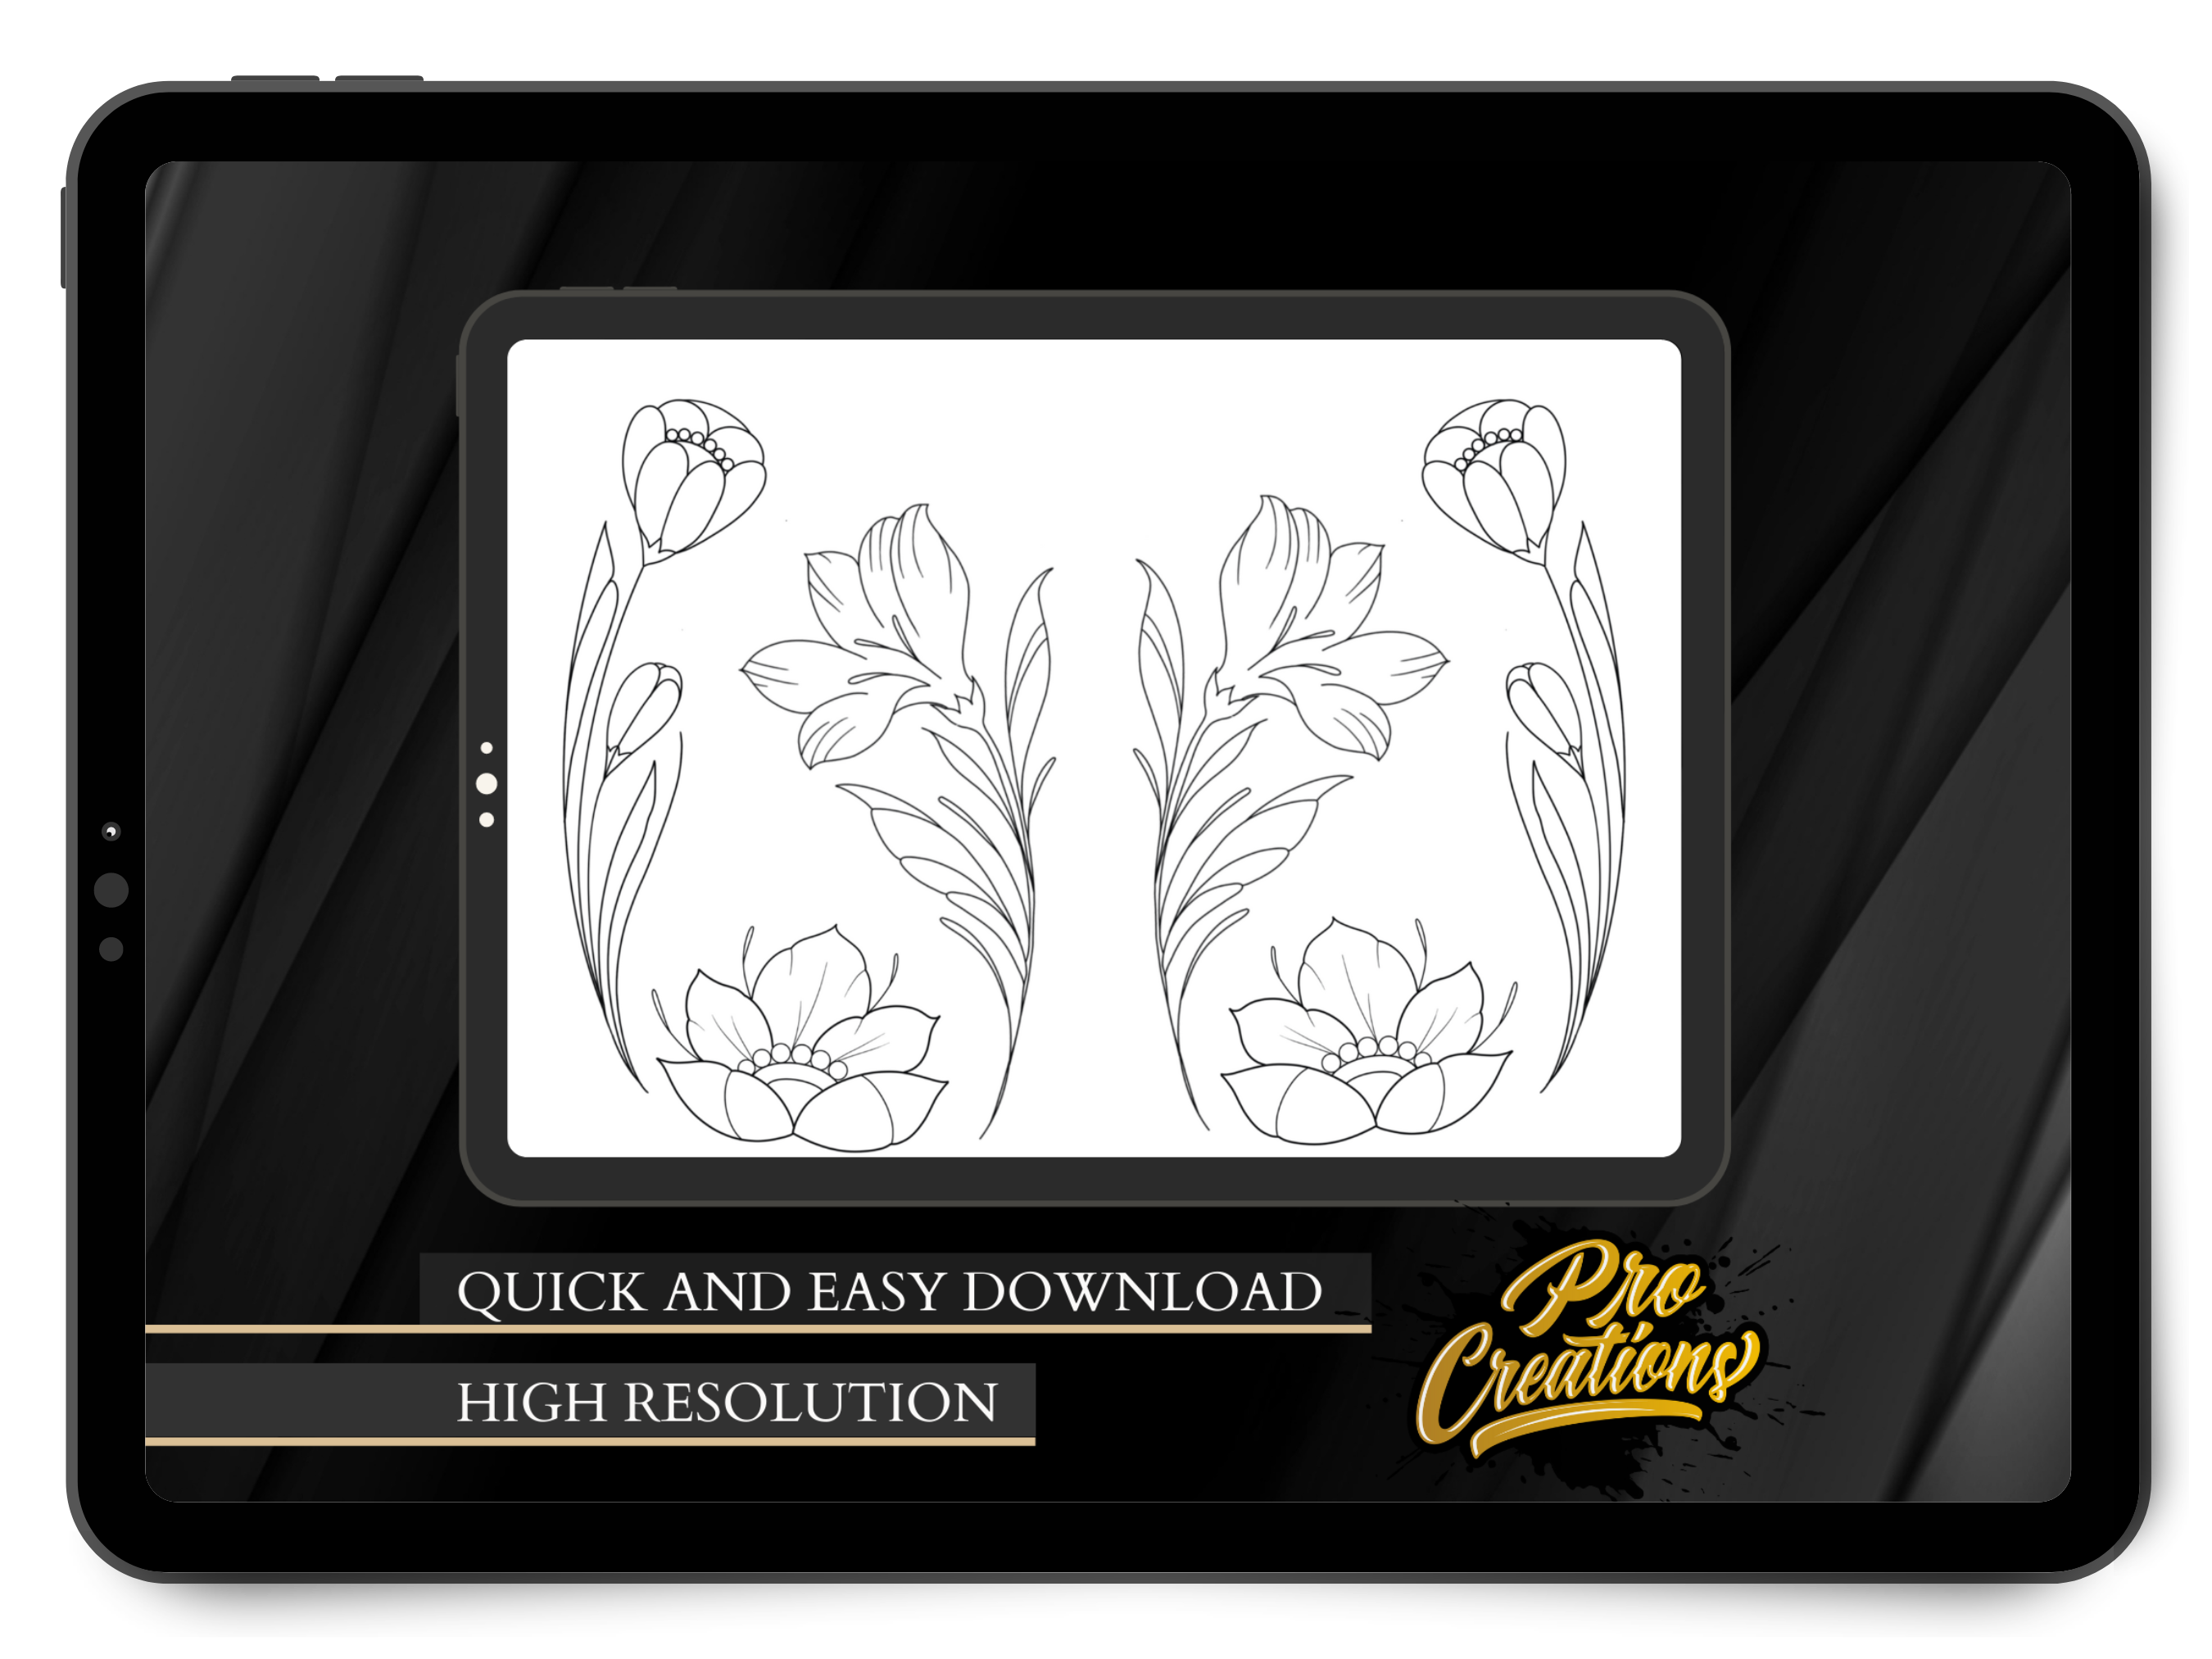 Neo-Traditional Floral Brush Set for Pro Create: 60+